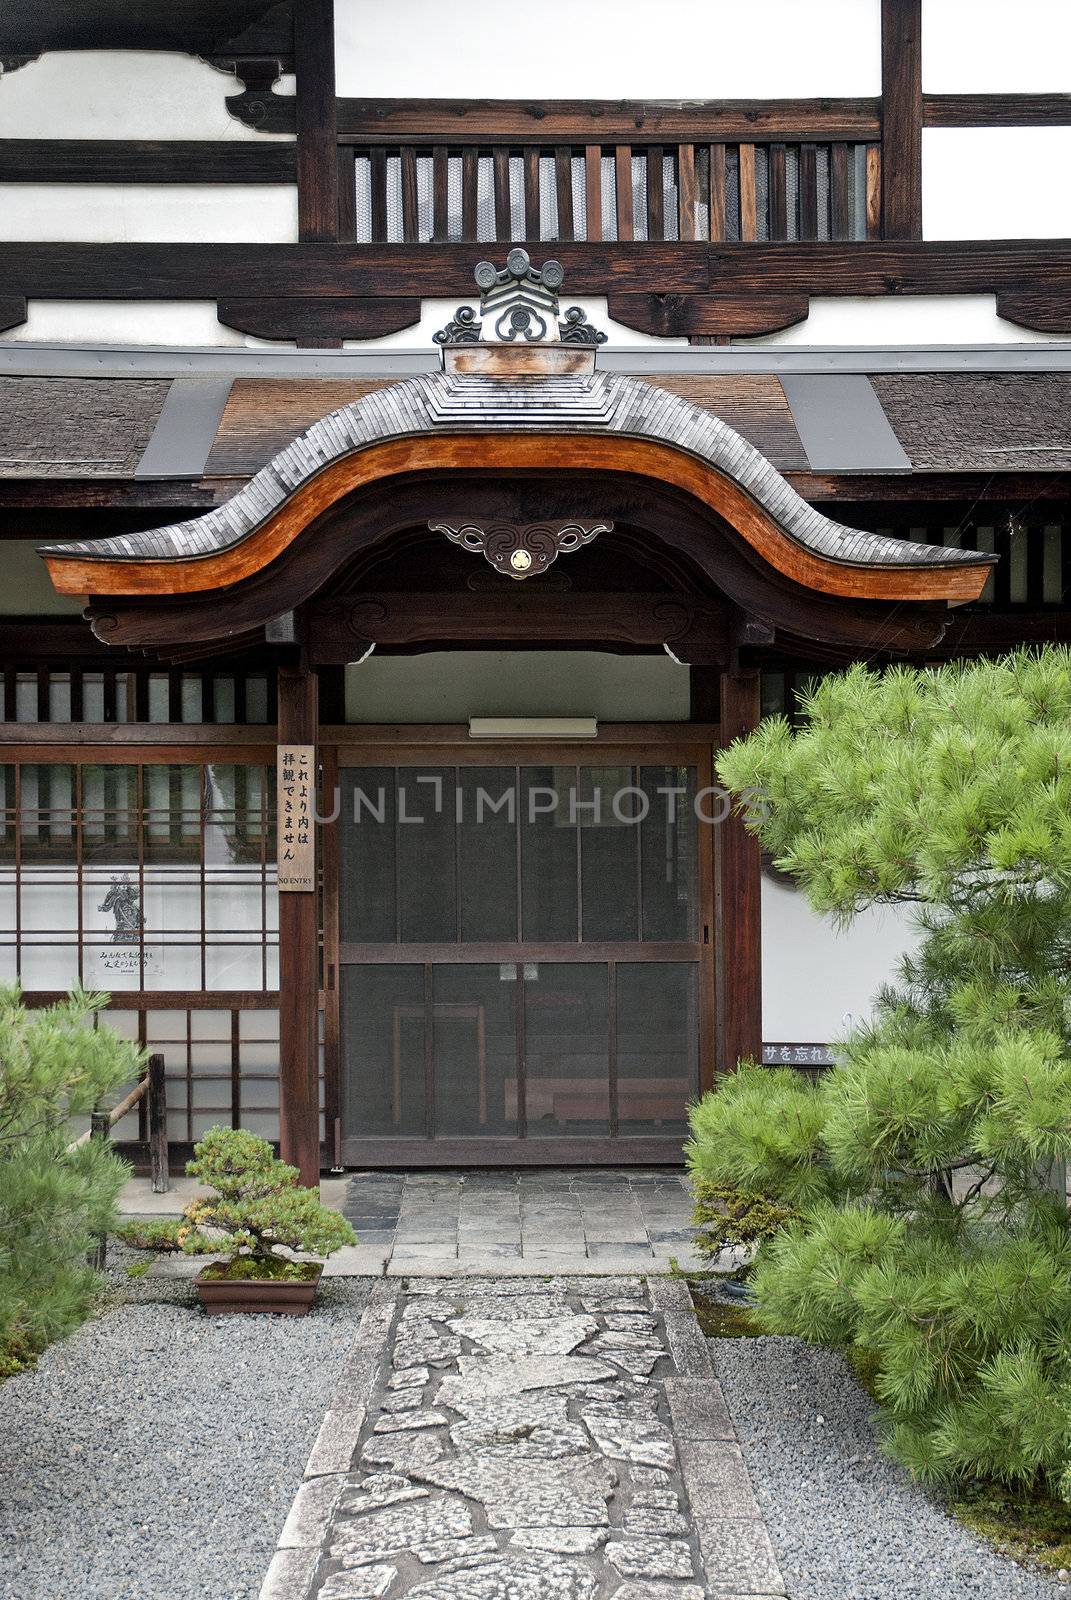 shinto temple in kyoto japan by jackmalipan